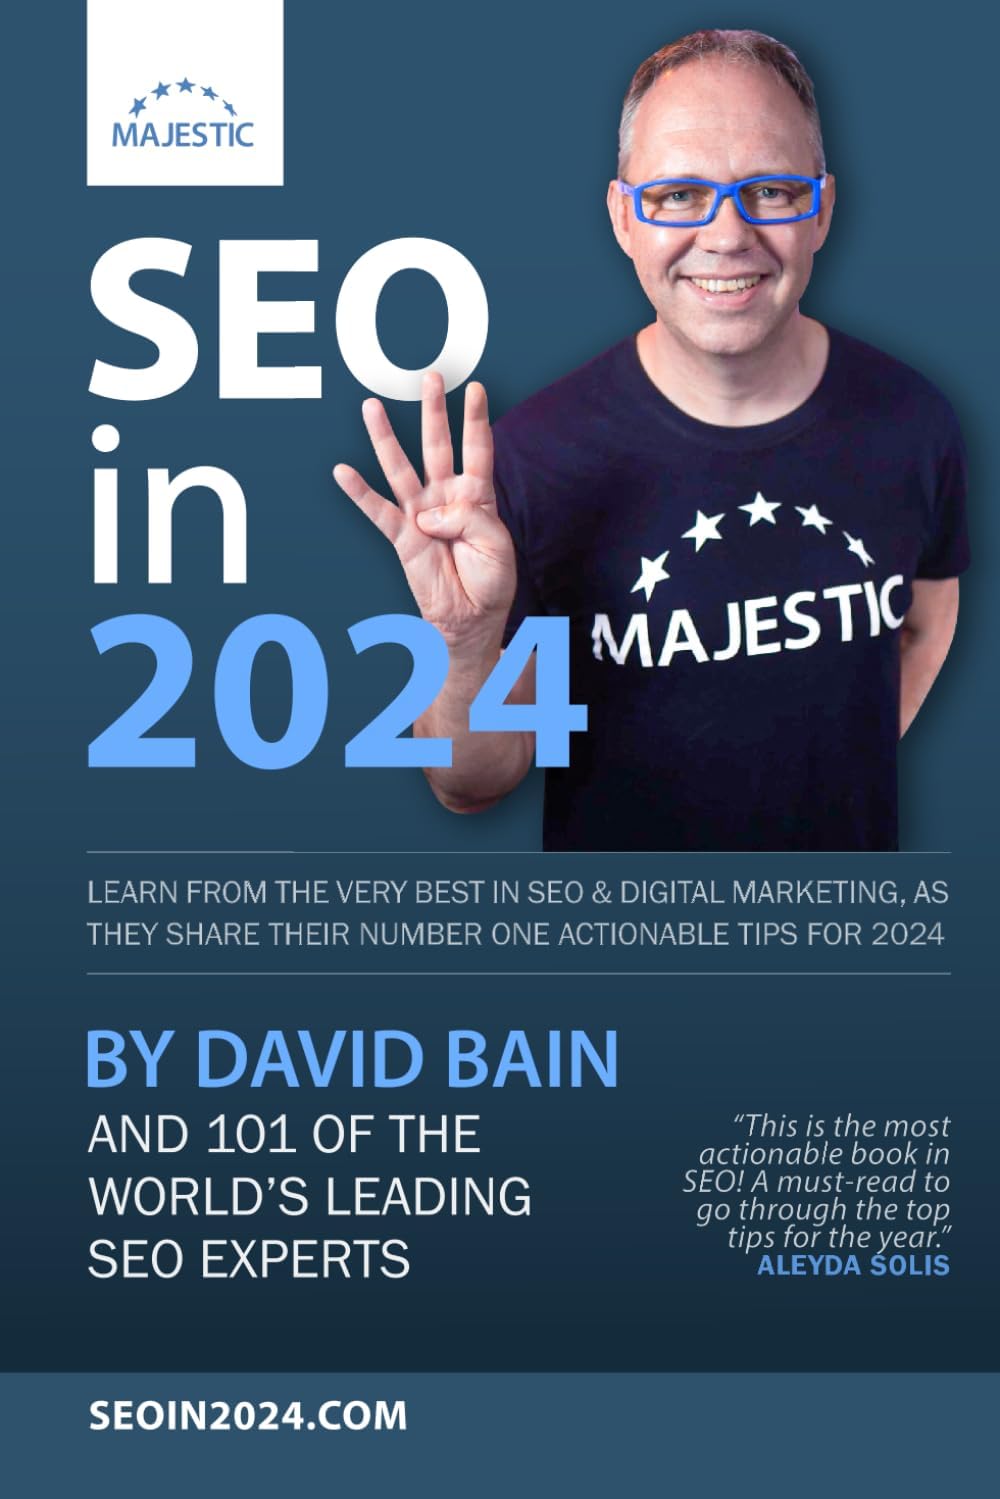 SEO in 2024: 101 of the world’s leading SEOs share their number 1, actionable tip for 2024